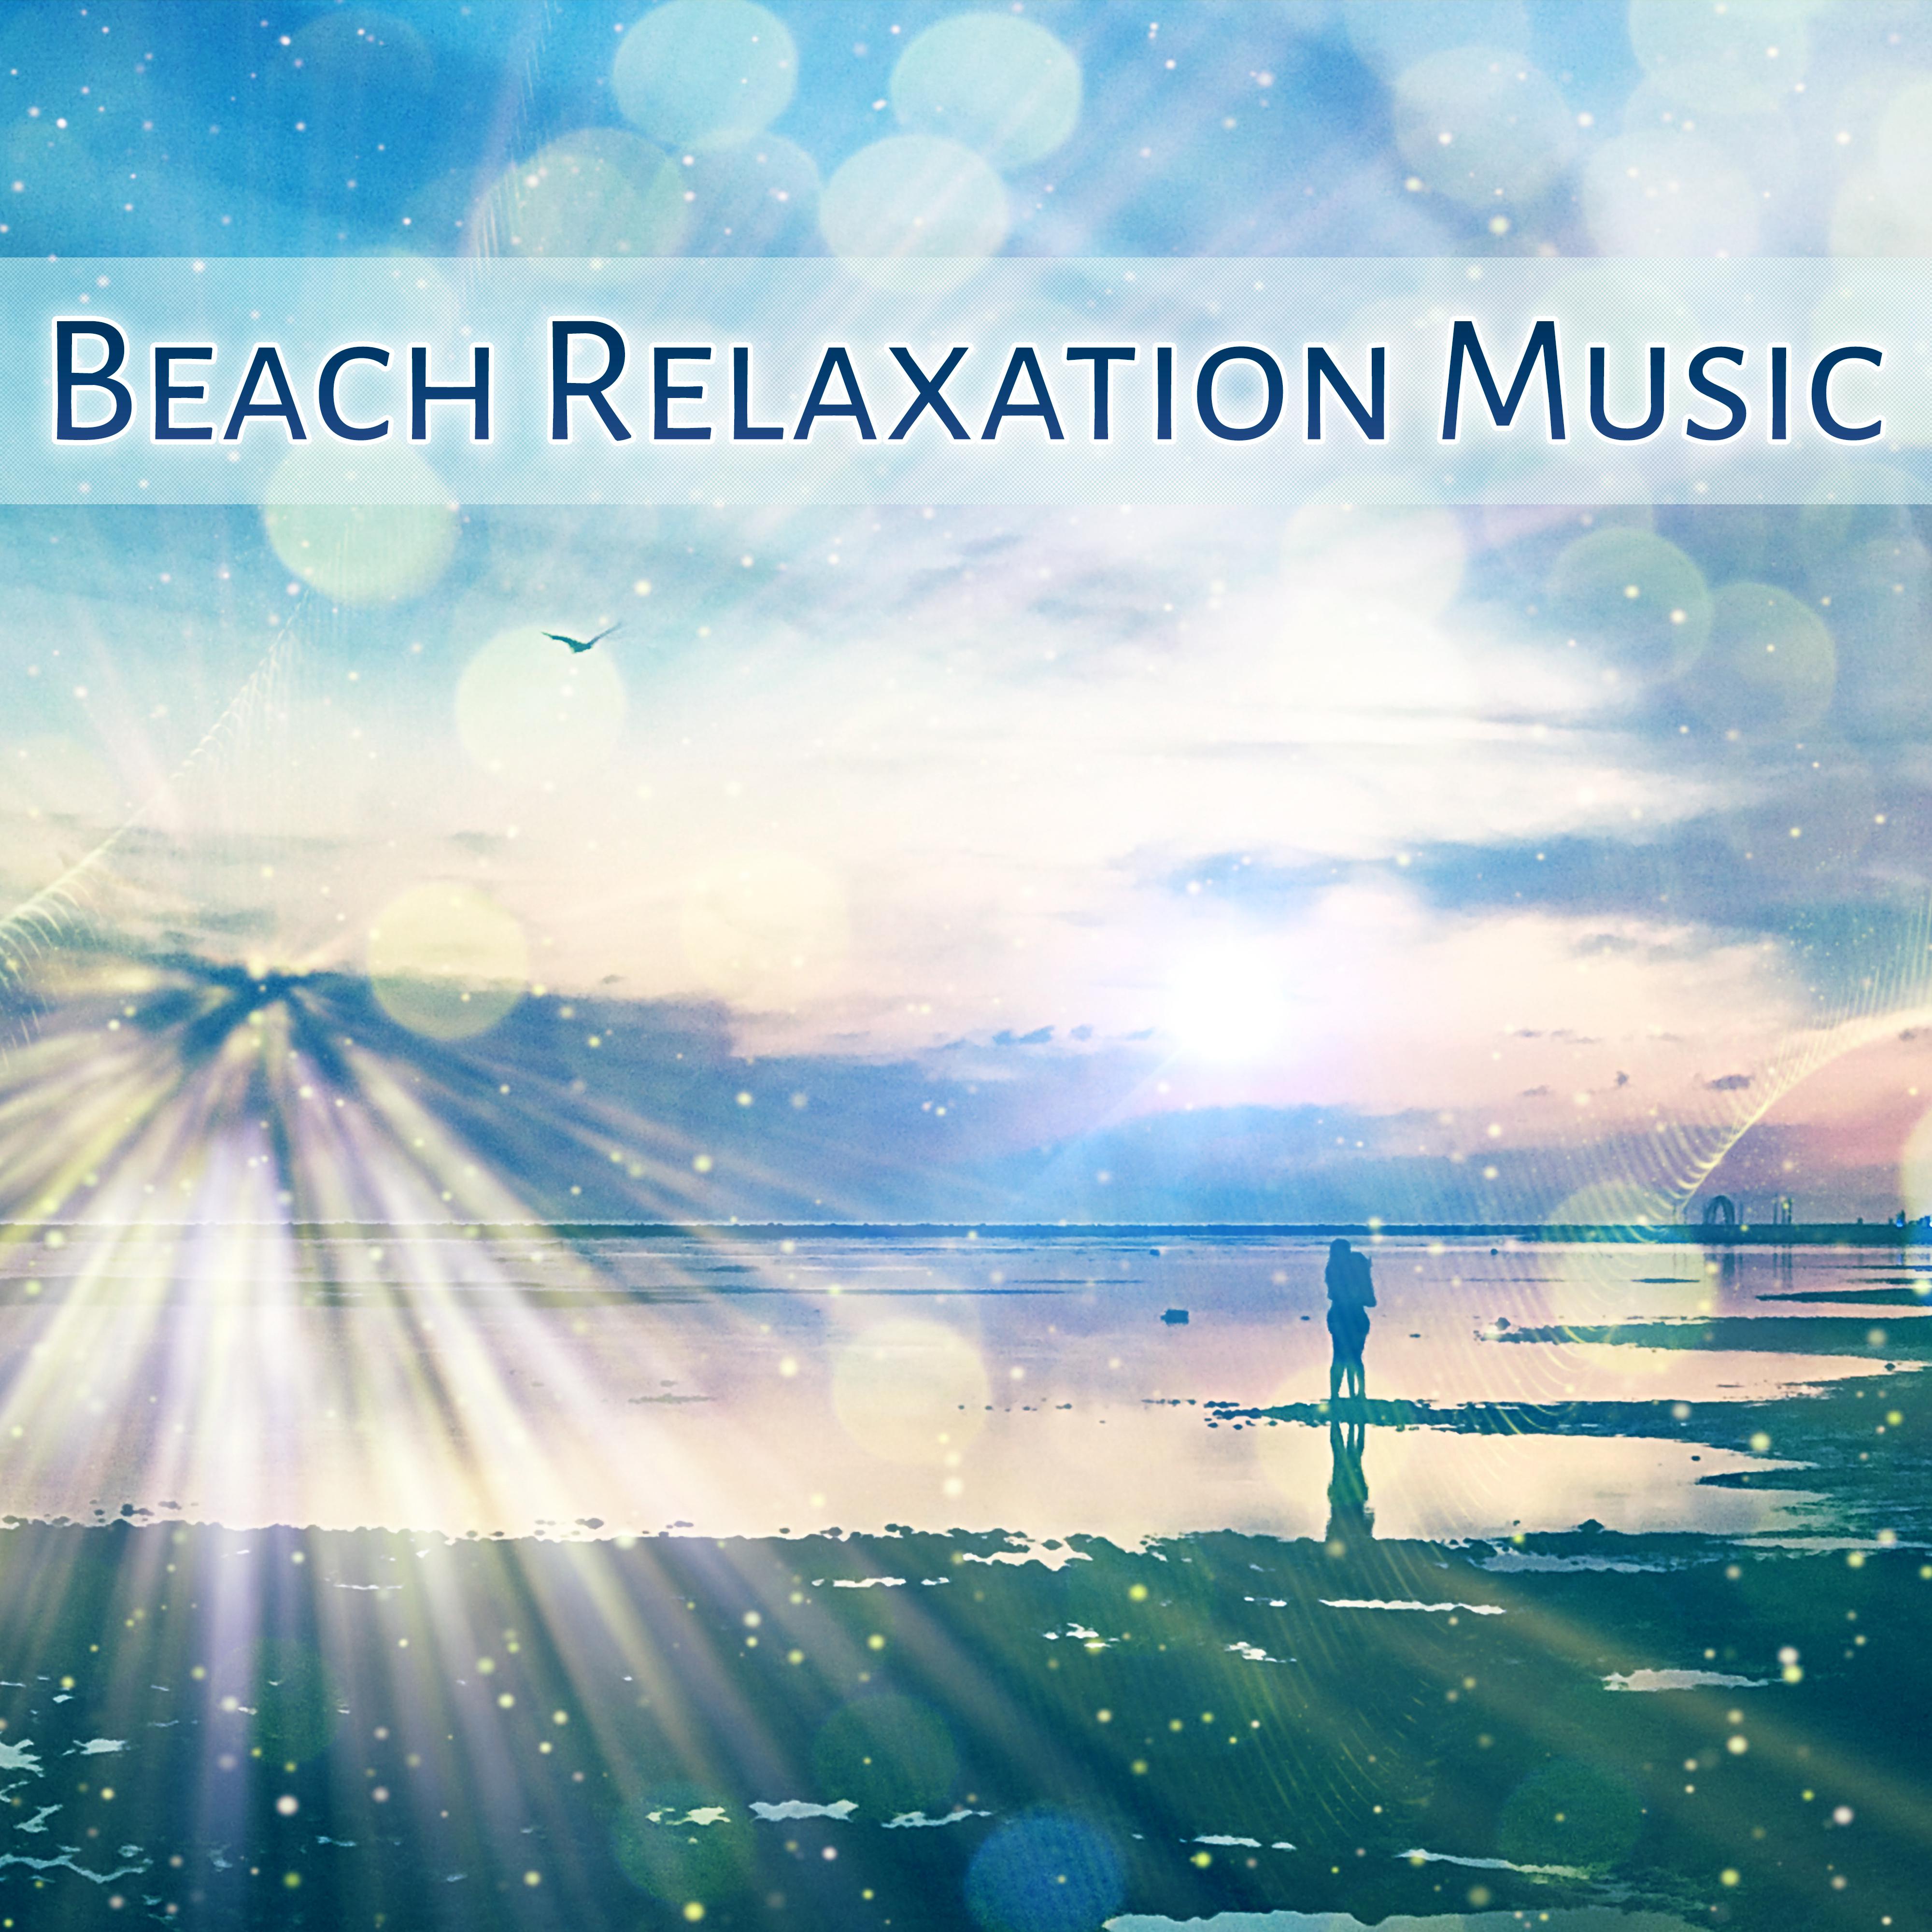 Beach Relaxation Music  Stress Relief with Chill Out Music, Sounds to Rest, Beach Lounge, Holiday Sounds